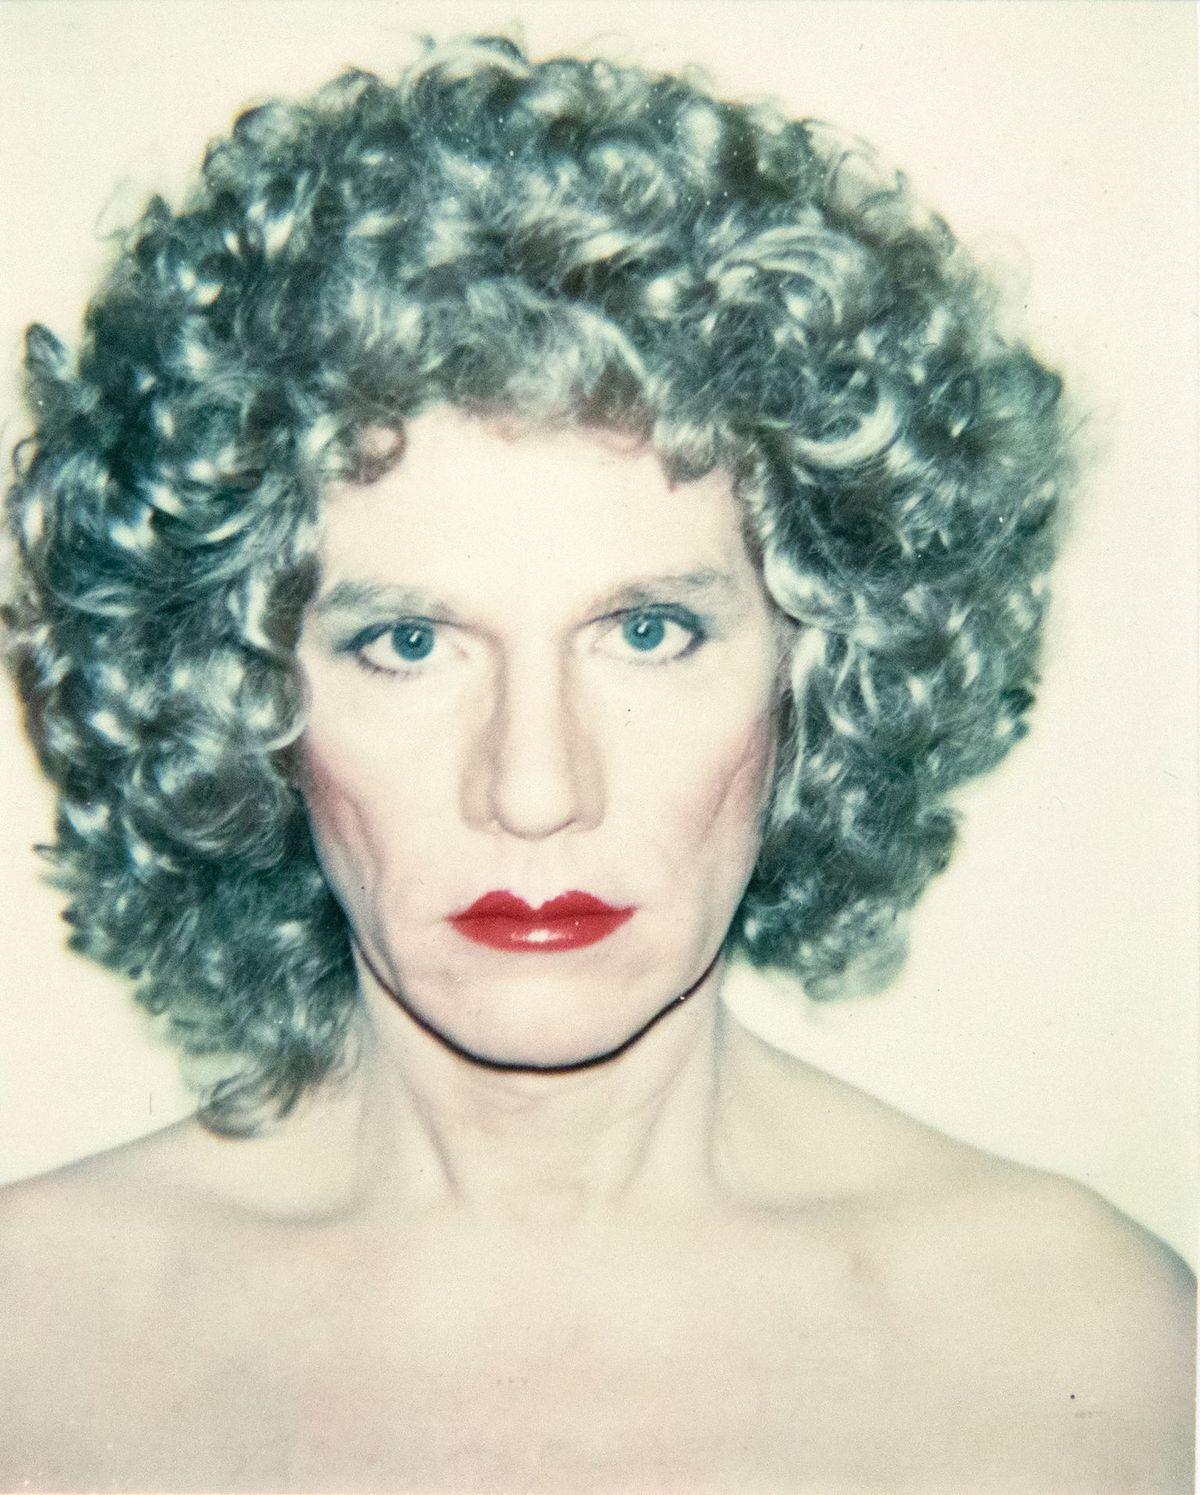 WARHOL, ANDY Portrait Photograph – Self-Porträt in Drag